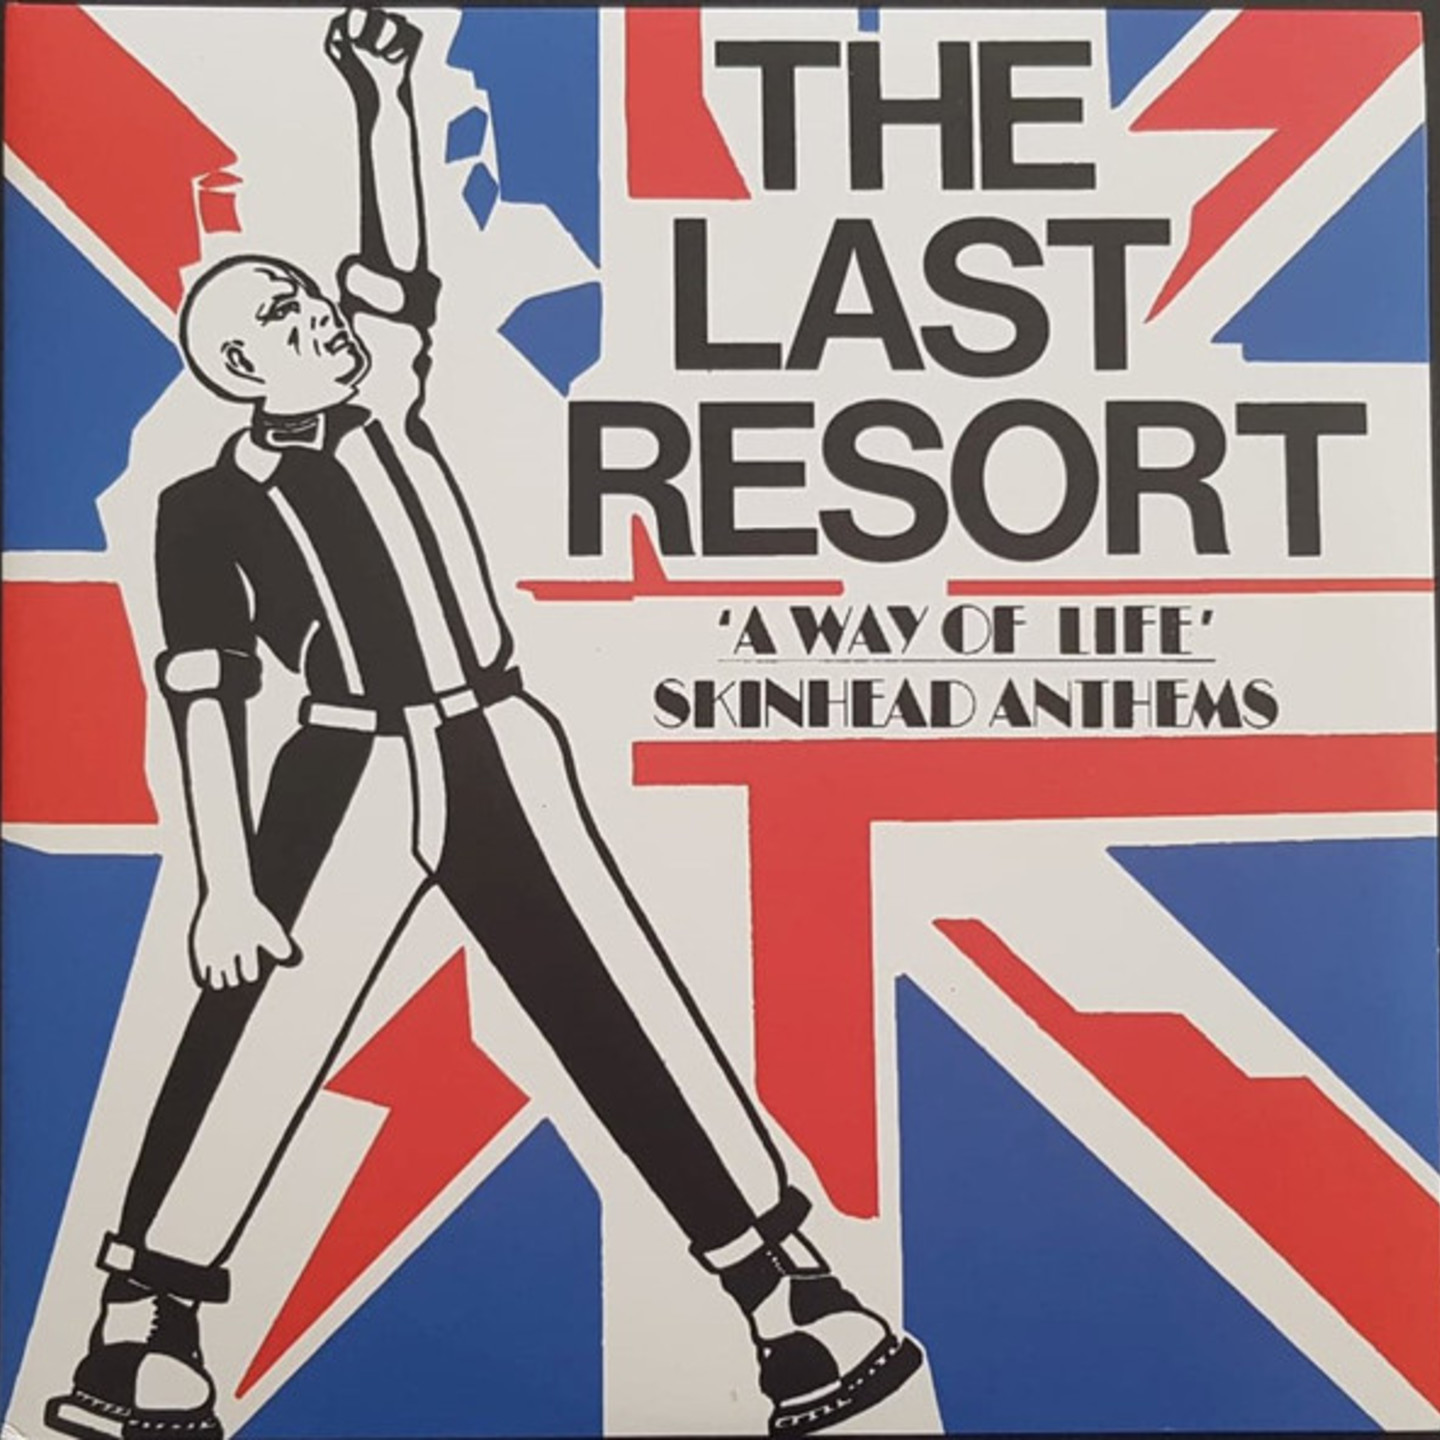 LAST RESORT, THE - A Way Of Life Skinhead Anthems LP